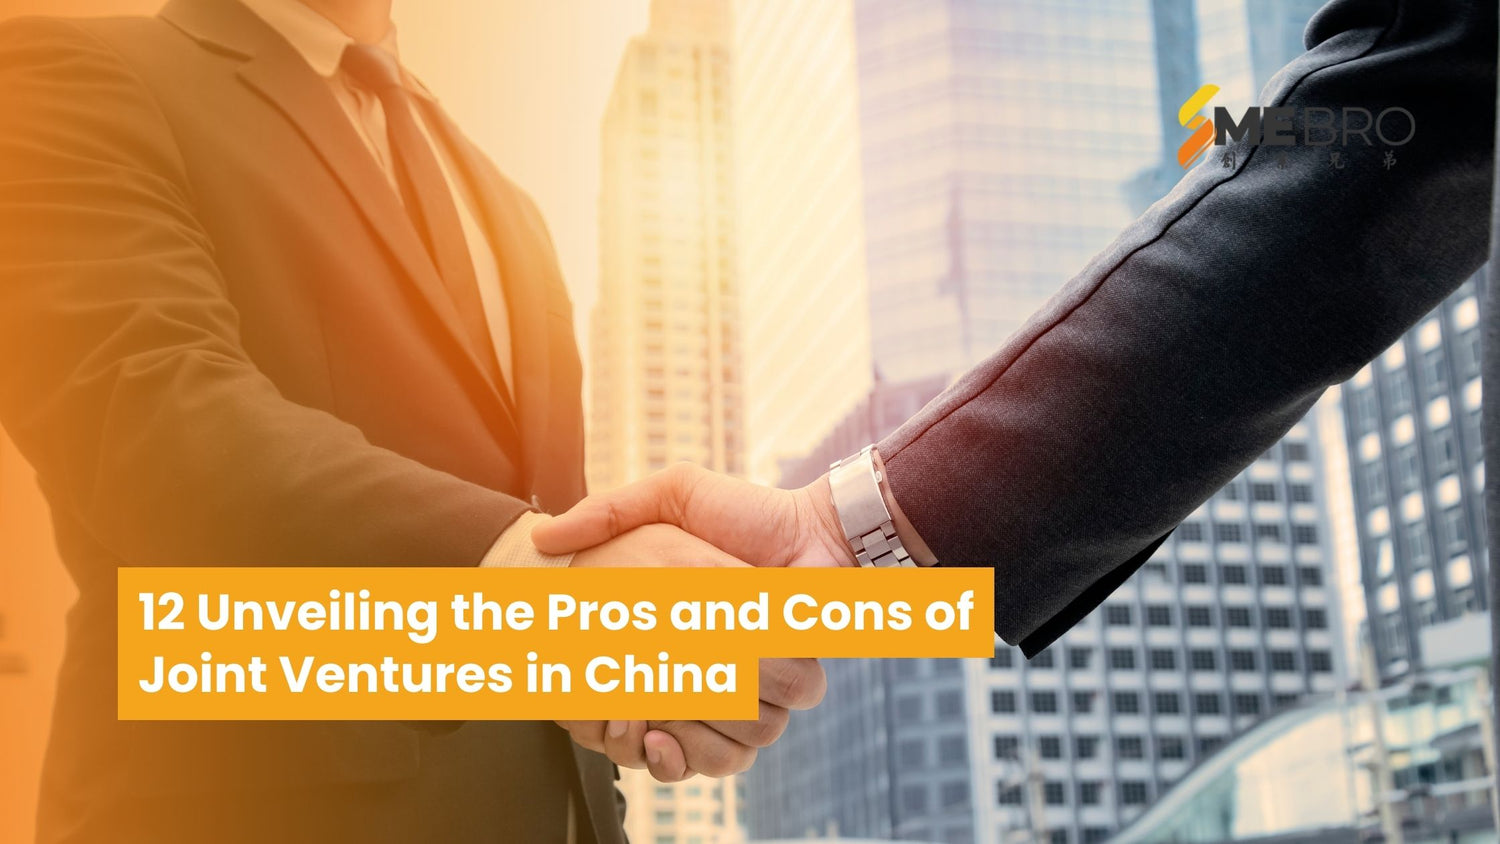 Pros and Cons of Joint Ventures in China